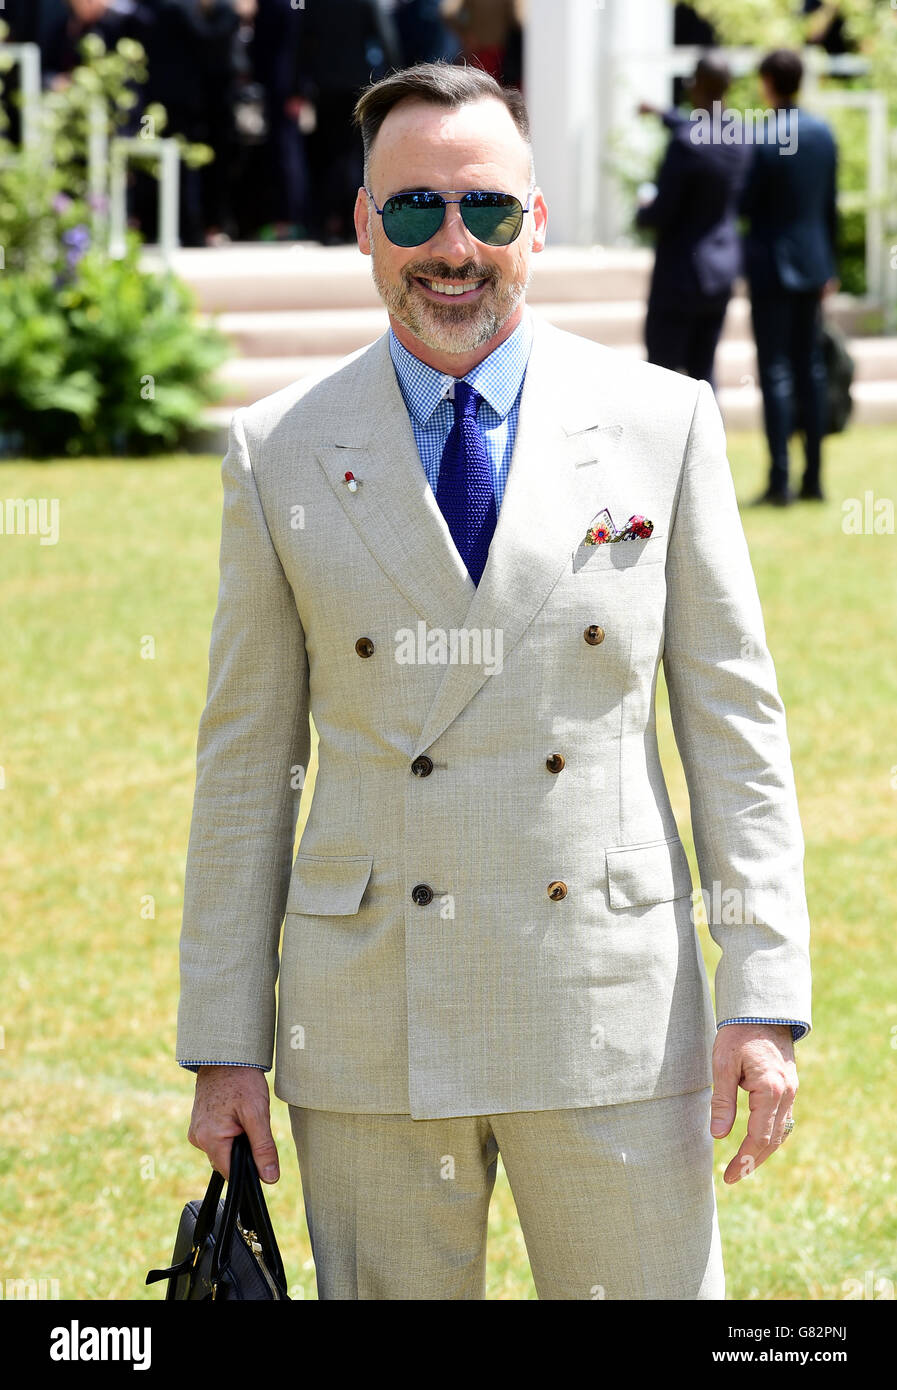 David Furnish arrives for the Burberry Prorsum Men's Fashion Show as part  of the London Collections: Men SS16 collection, held at Perks Field,  Kensington Gardens, London. PRESS ASSOCIATION Photo. Picture date: Monday